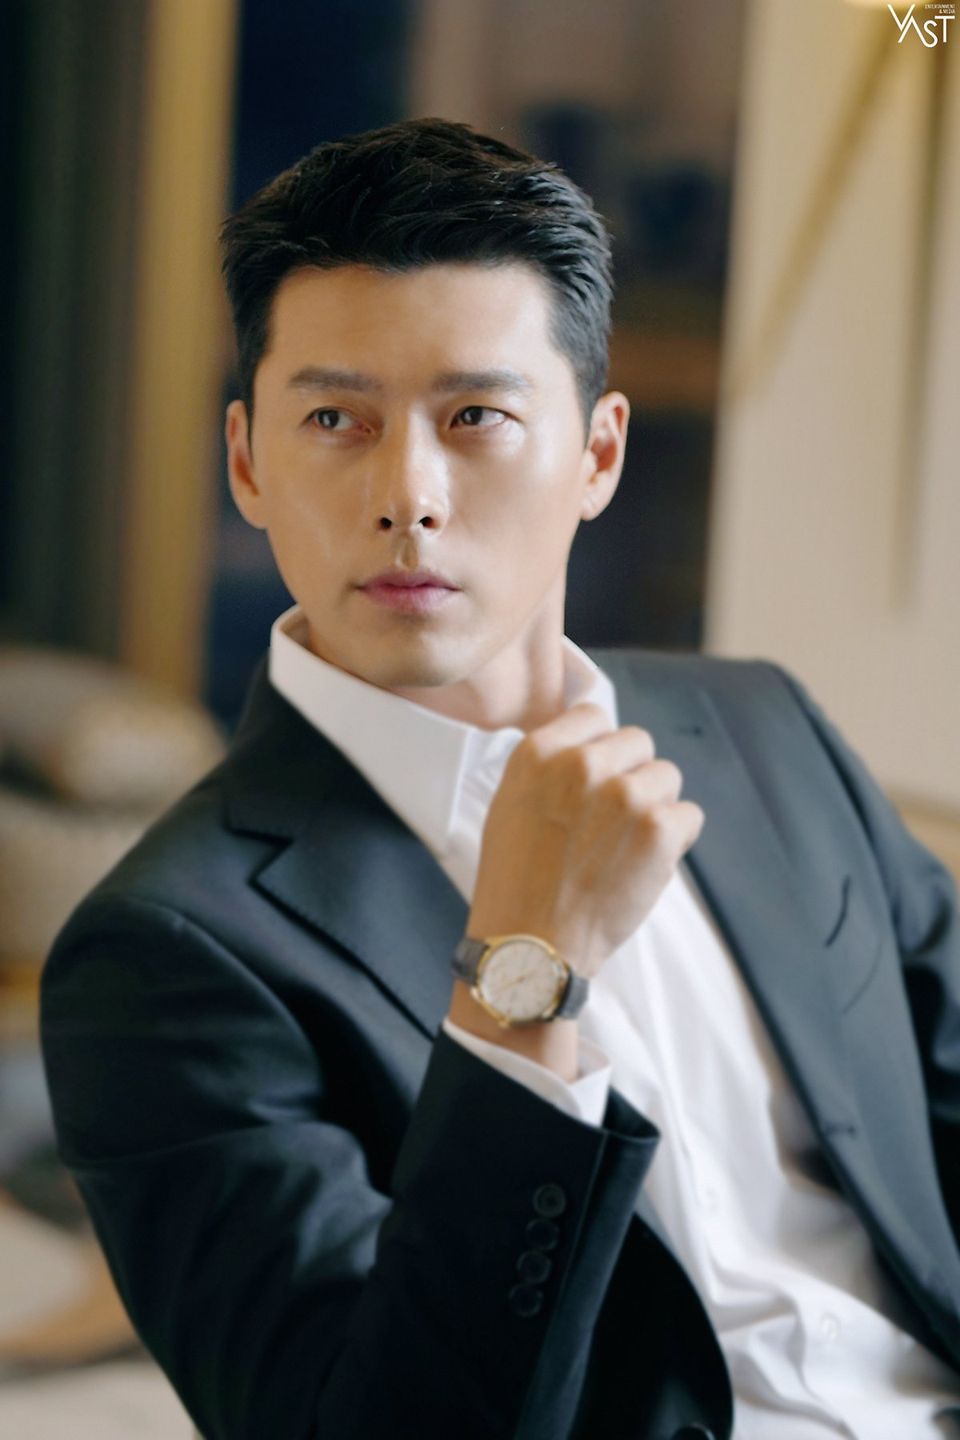 Hyun Bin 현빈 [Movies: “The Point Men”, “Confidential Assignment 2 ...